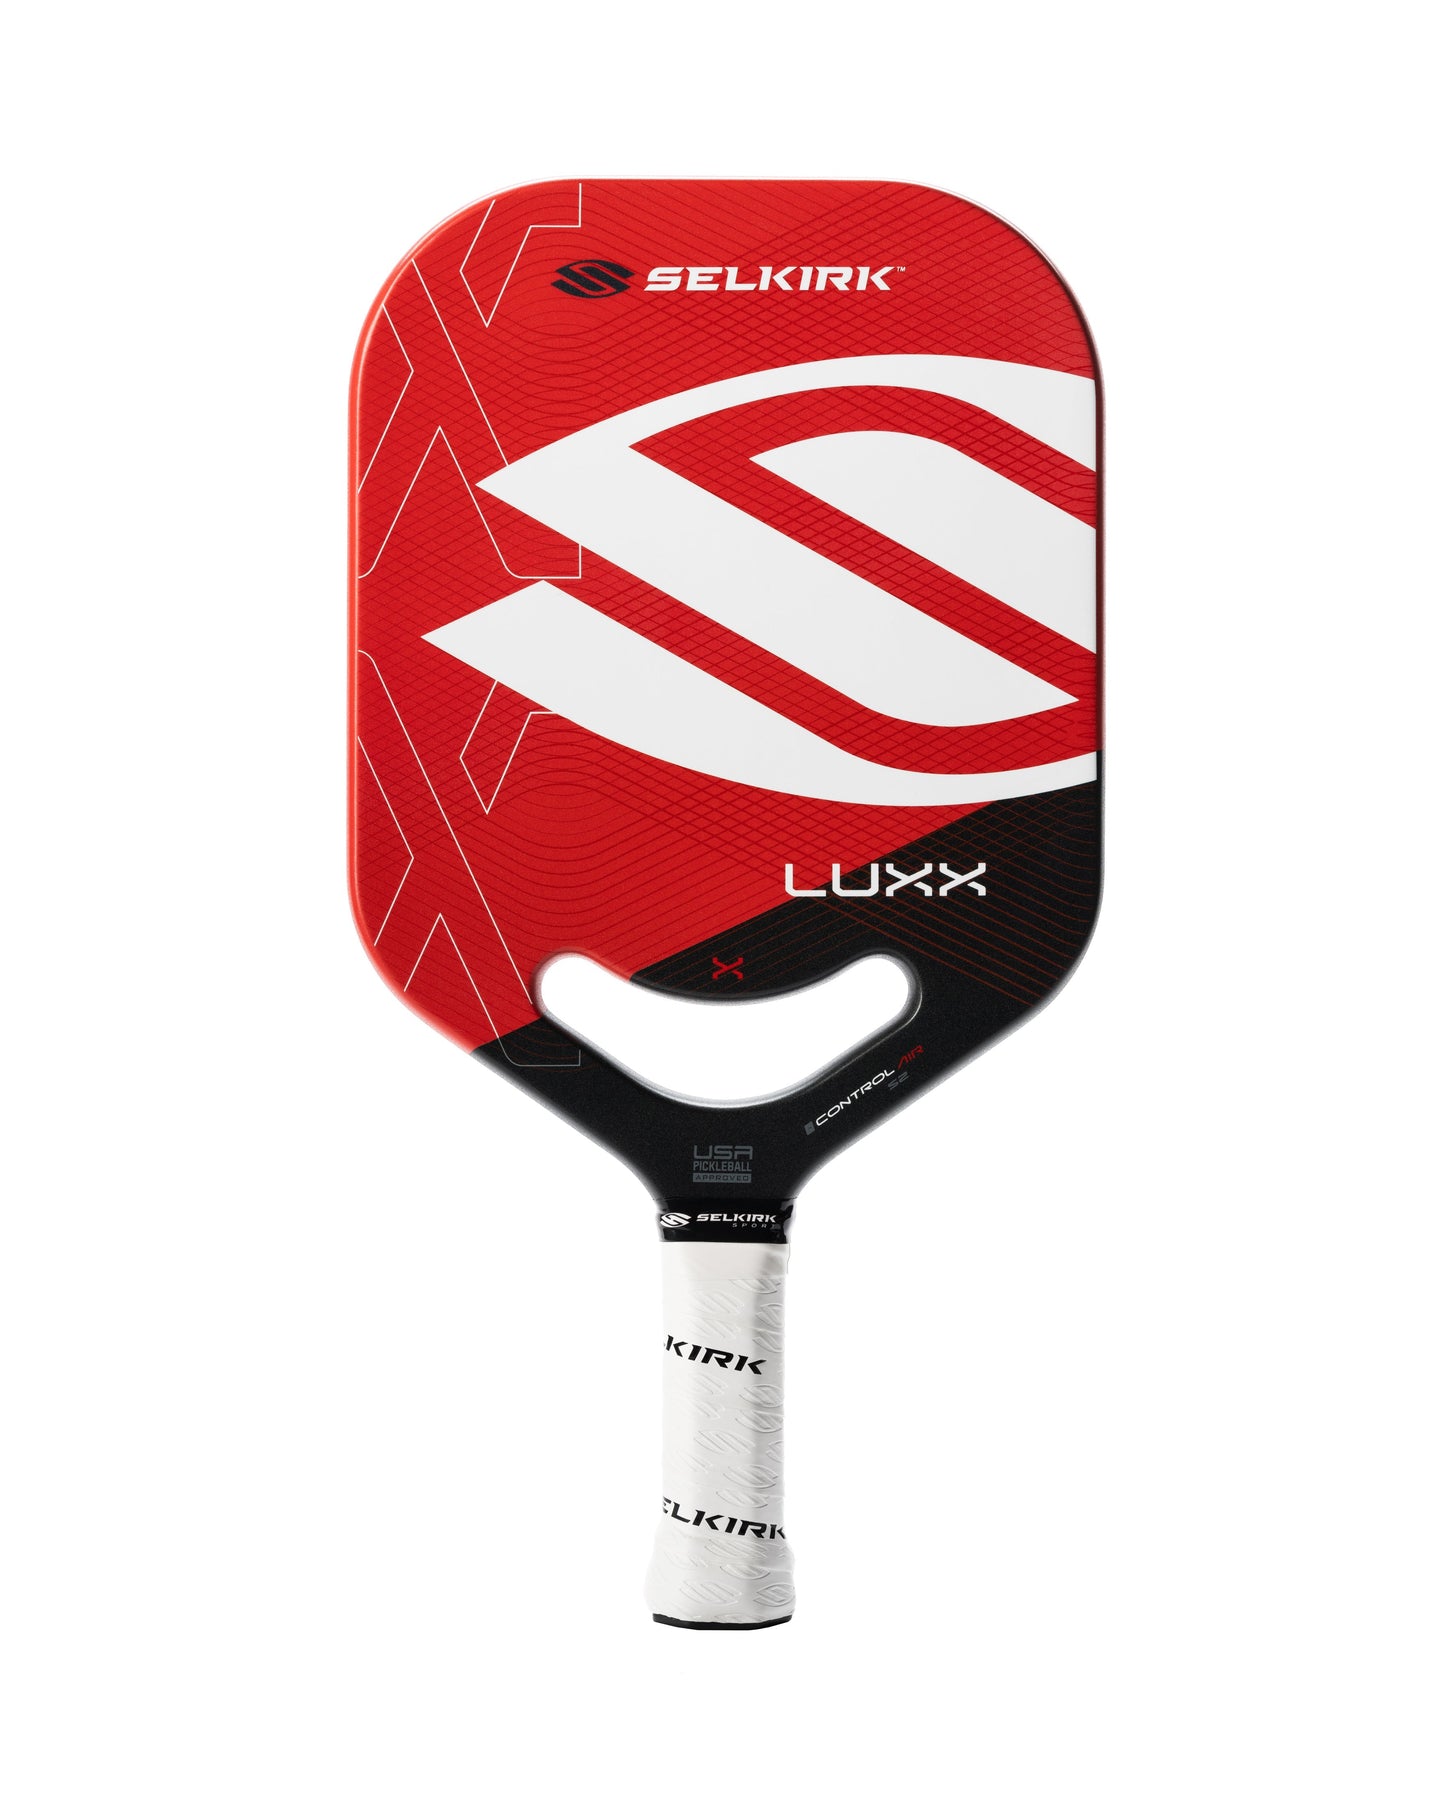 Selkirk Luxx Control Air - S2 (Red)